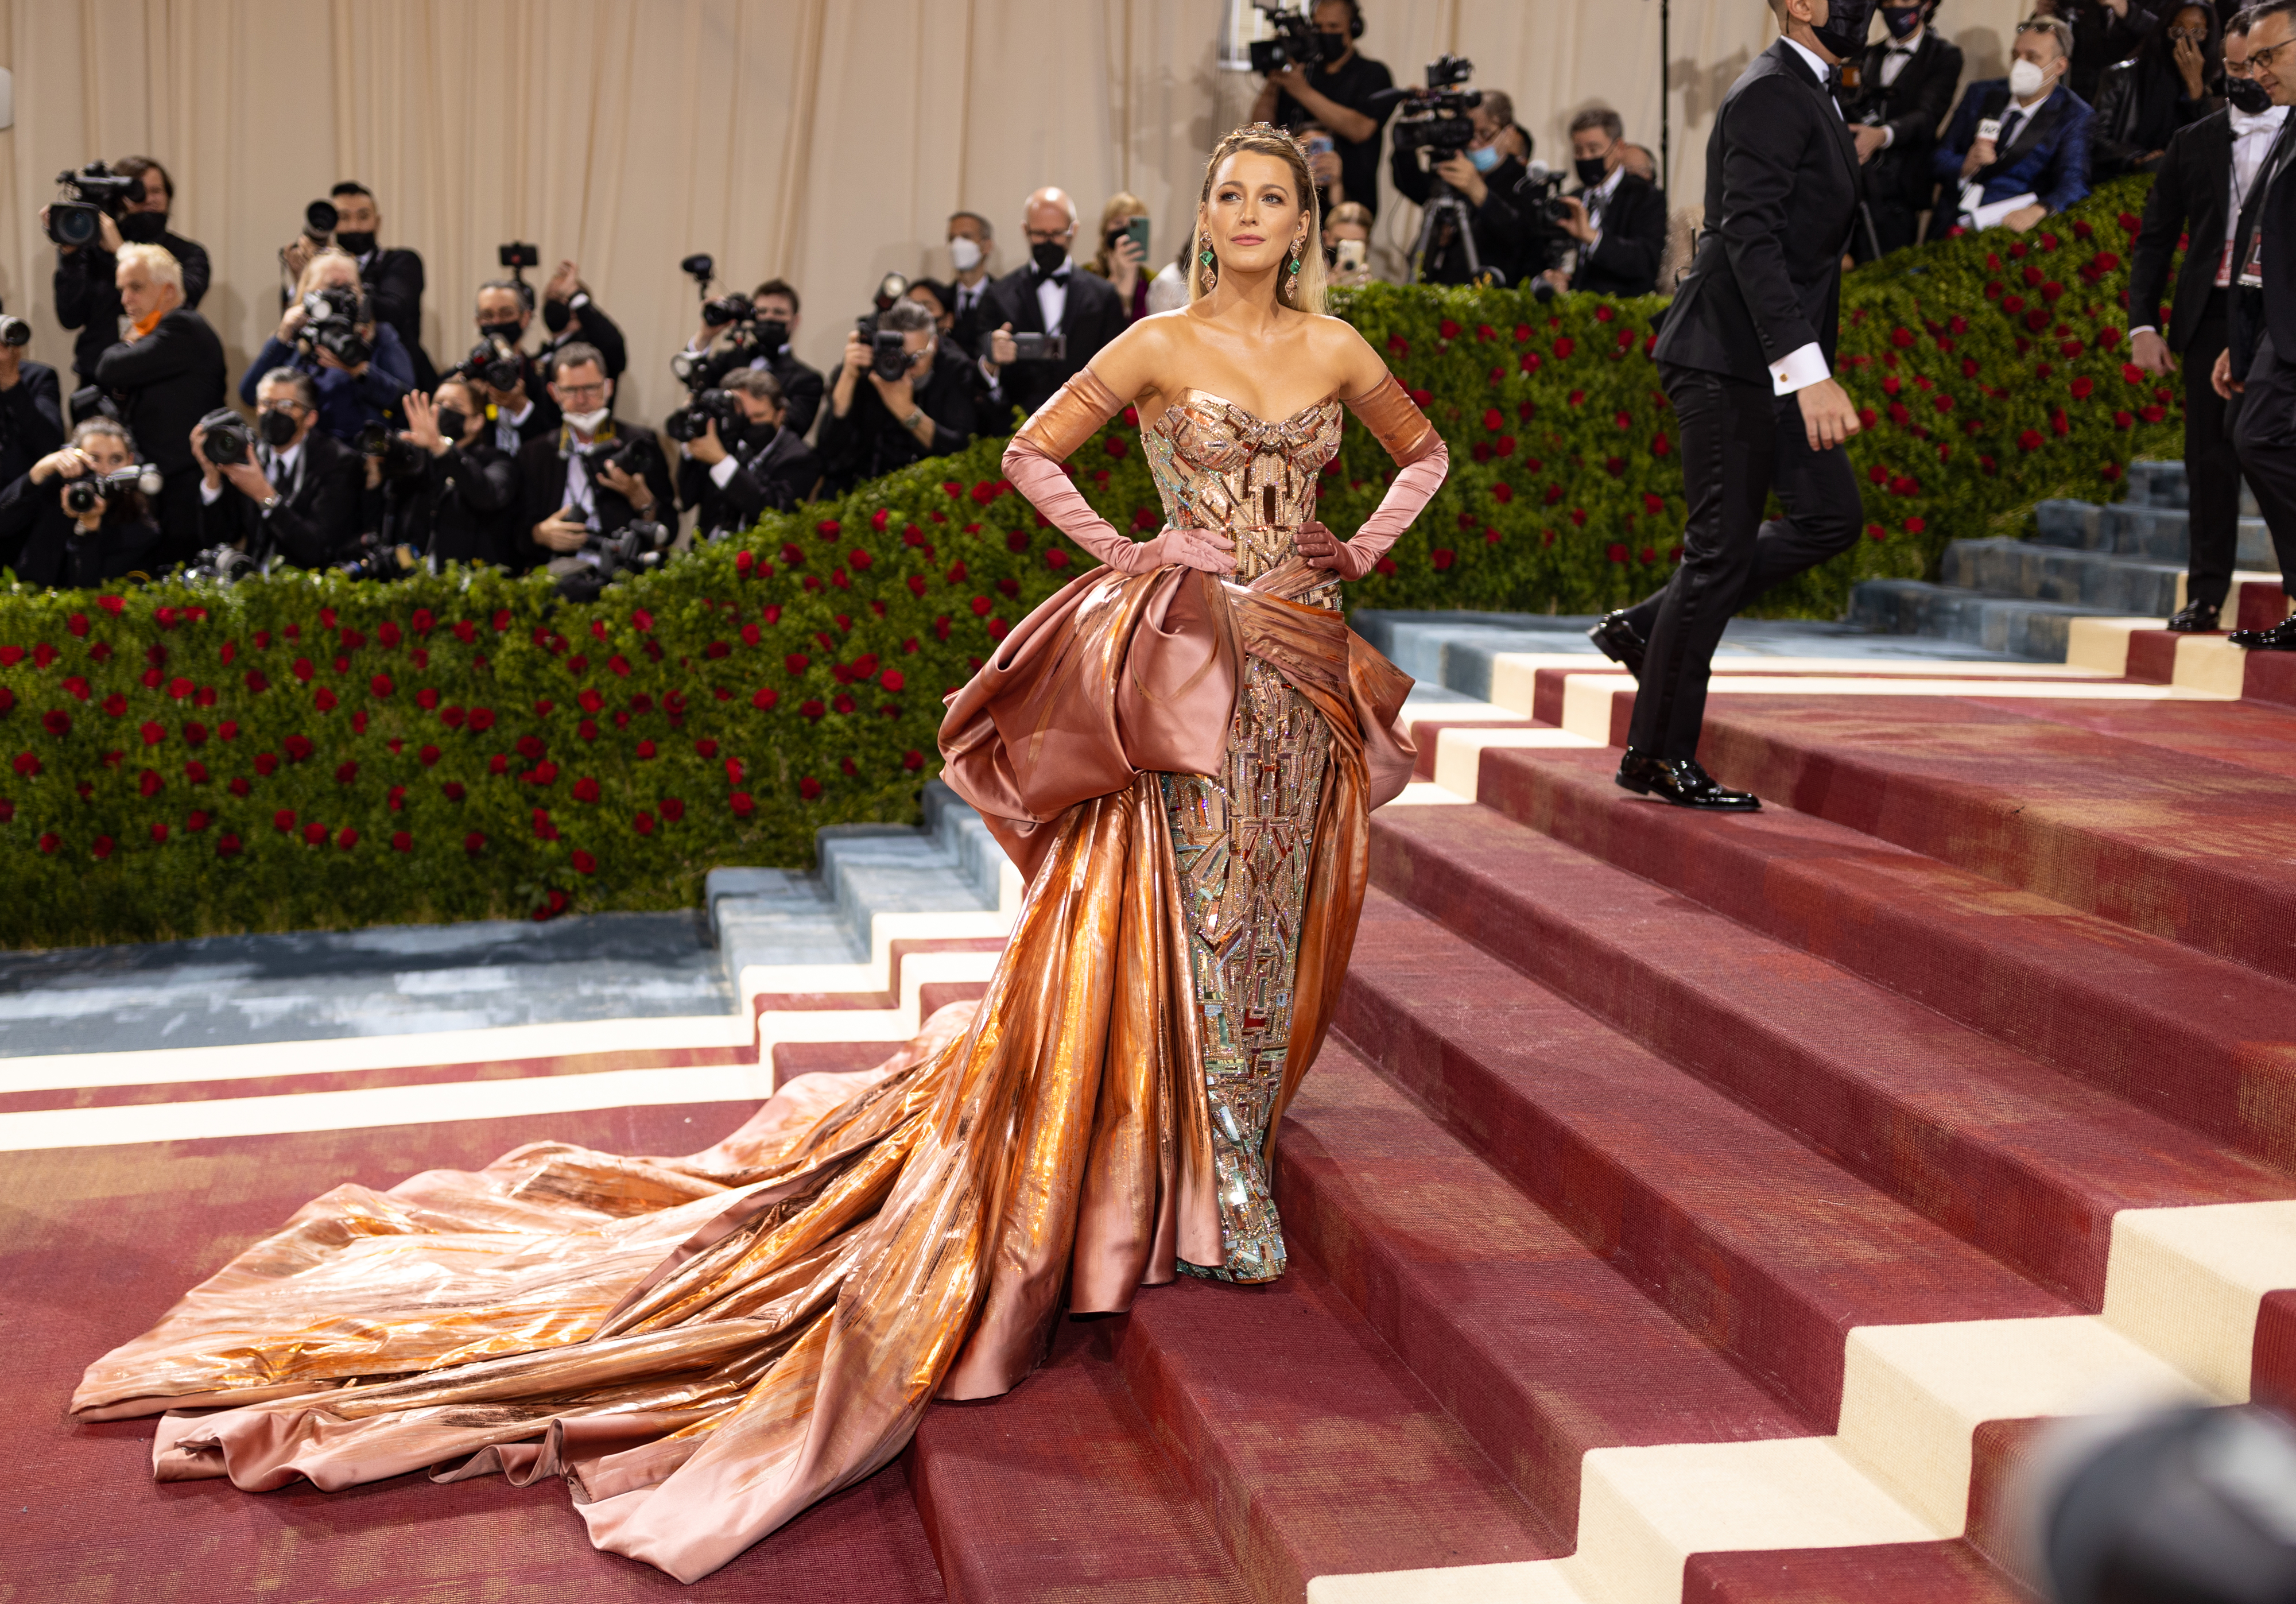 Blake Lively in a metallic dress with a long train and gloves on Met Gala steps,